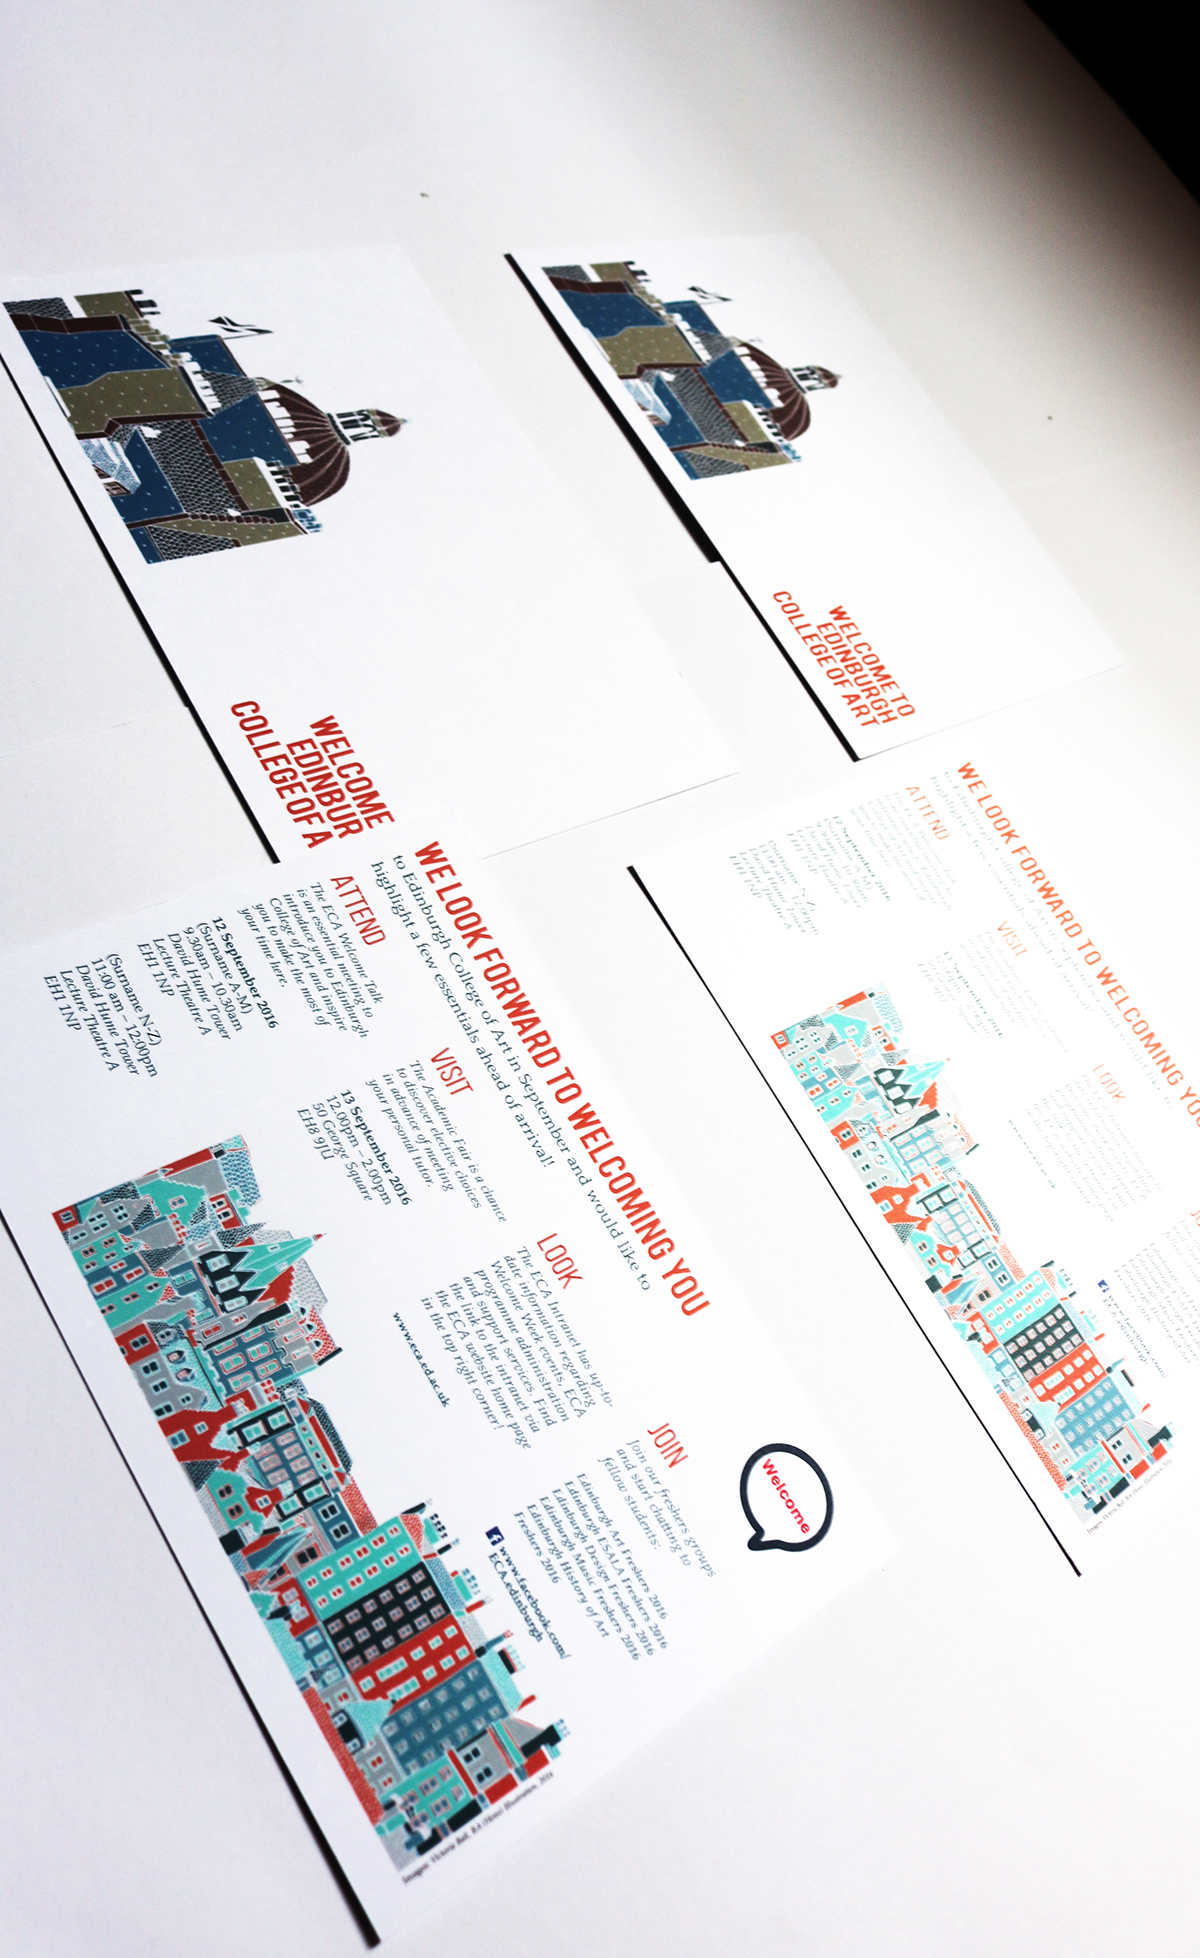 #graphicDesign #print #Advertising #illustration #Design #type #layout #typography #postcards